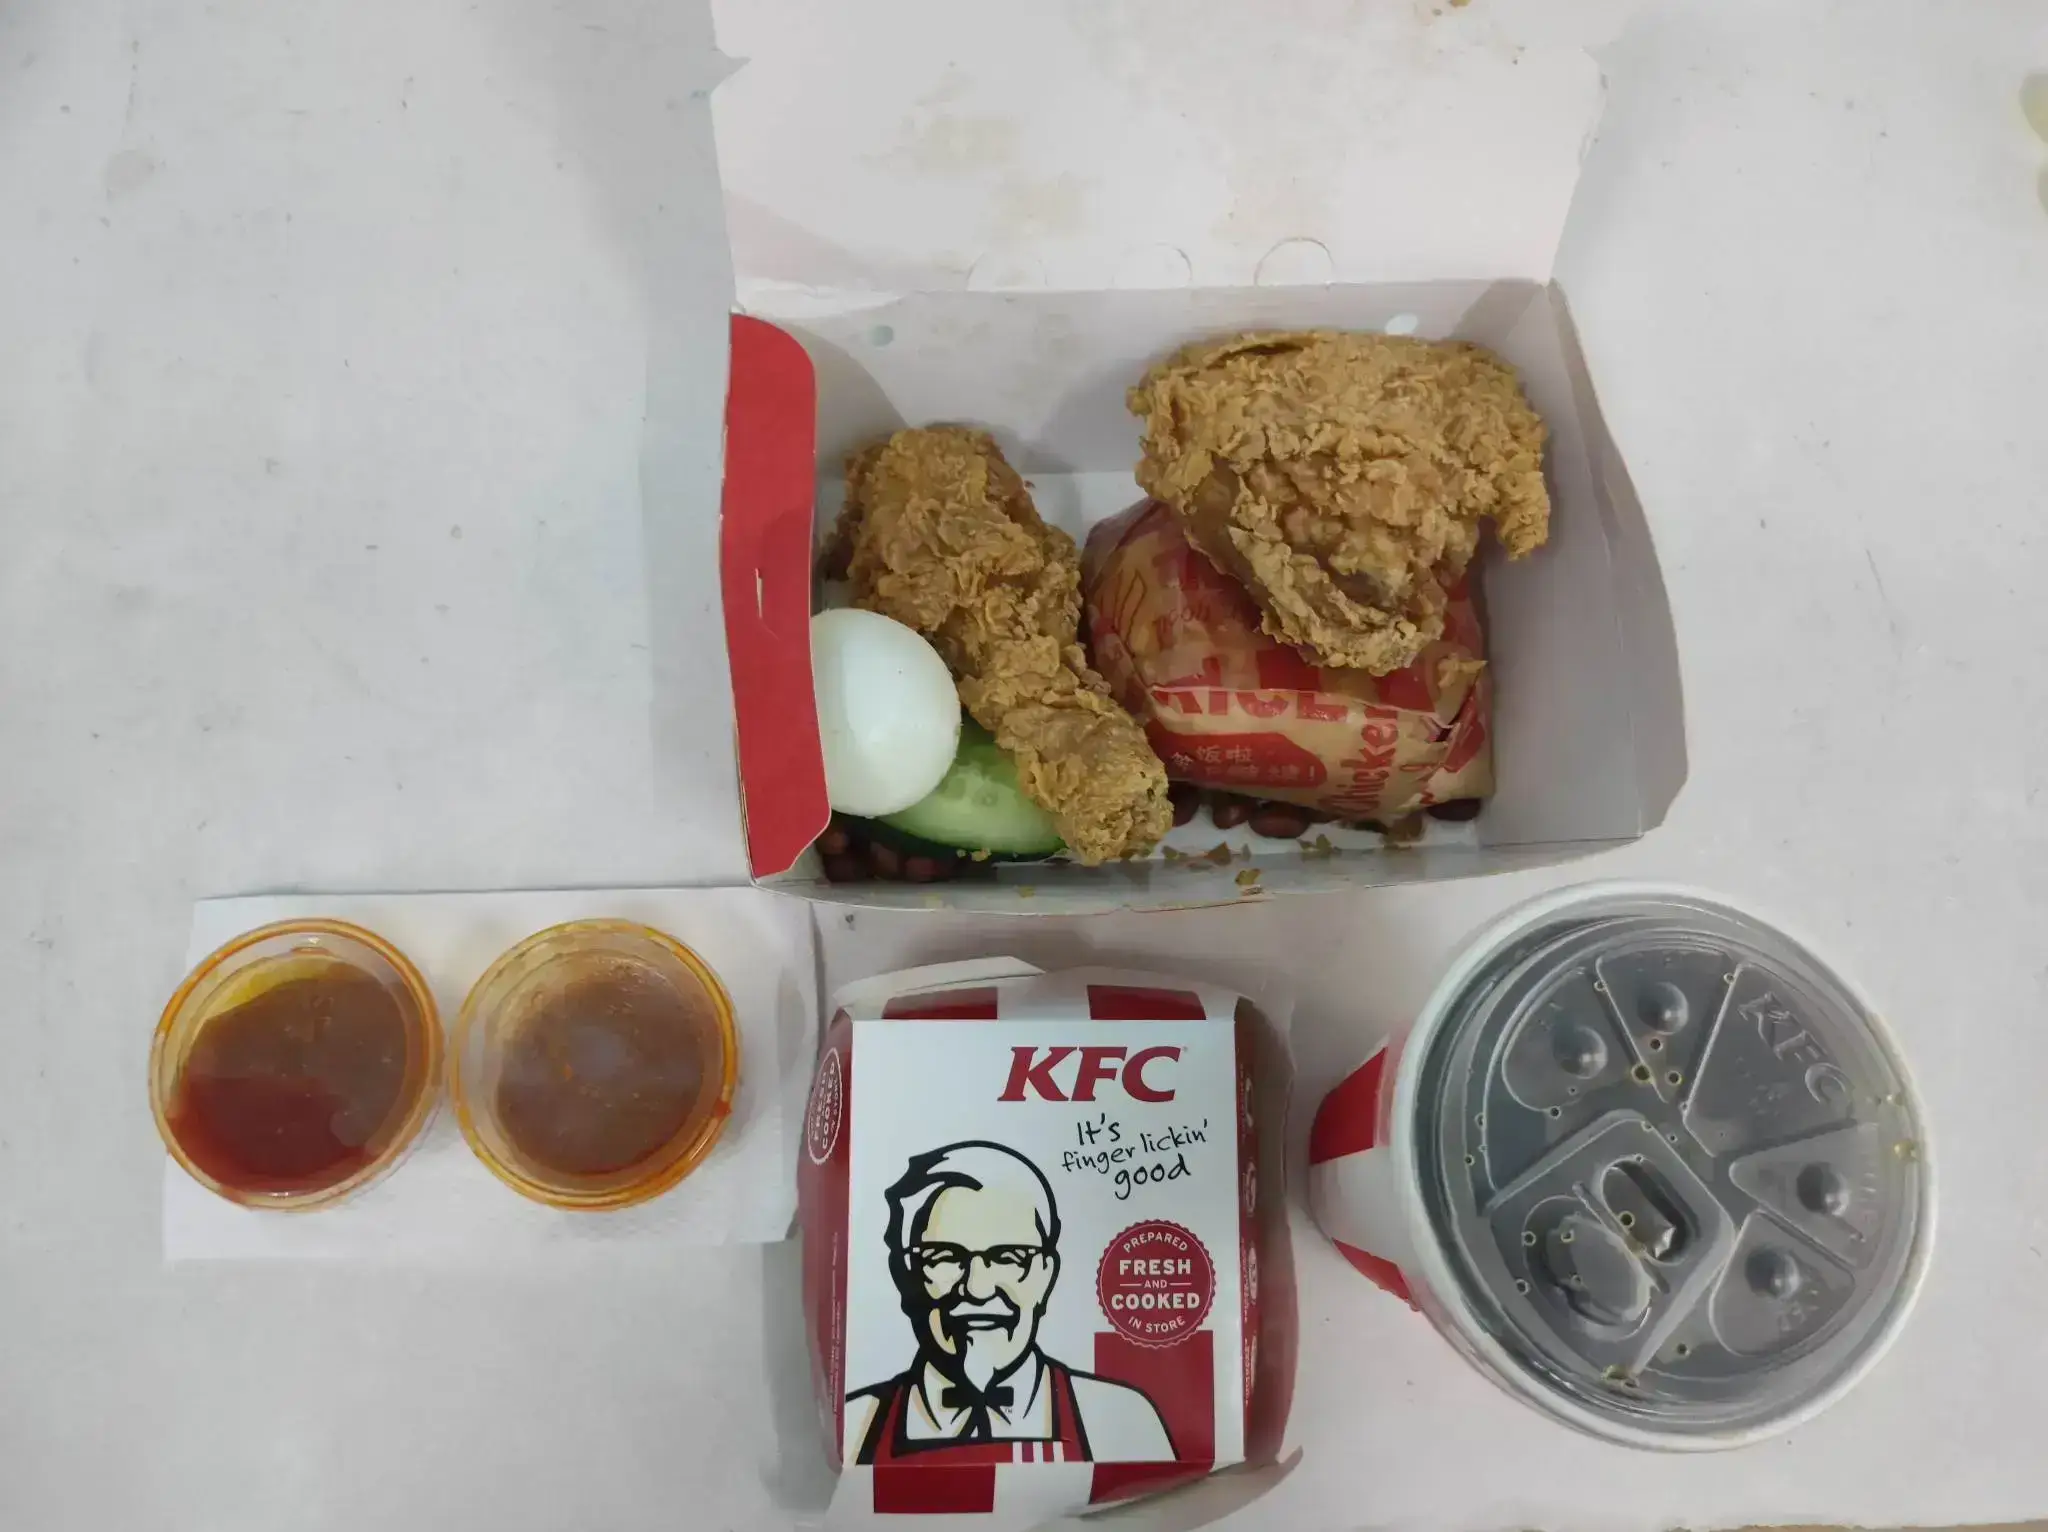 KFC Value combo offer fried chicken, wrap, drinks and sauces